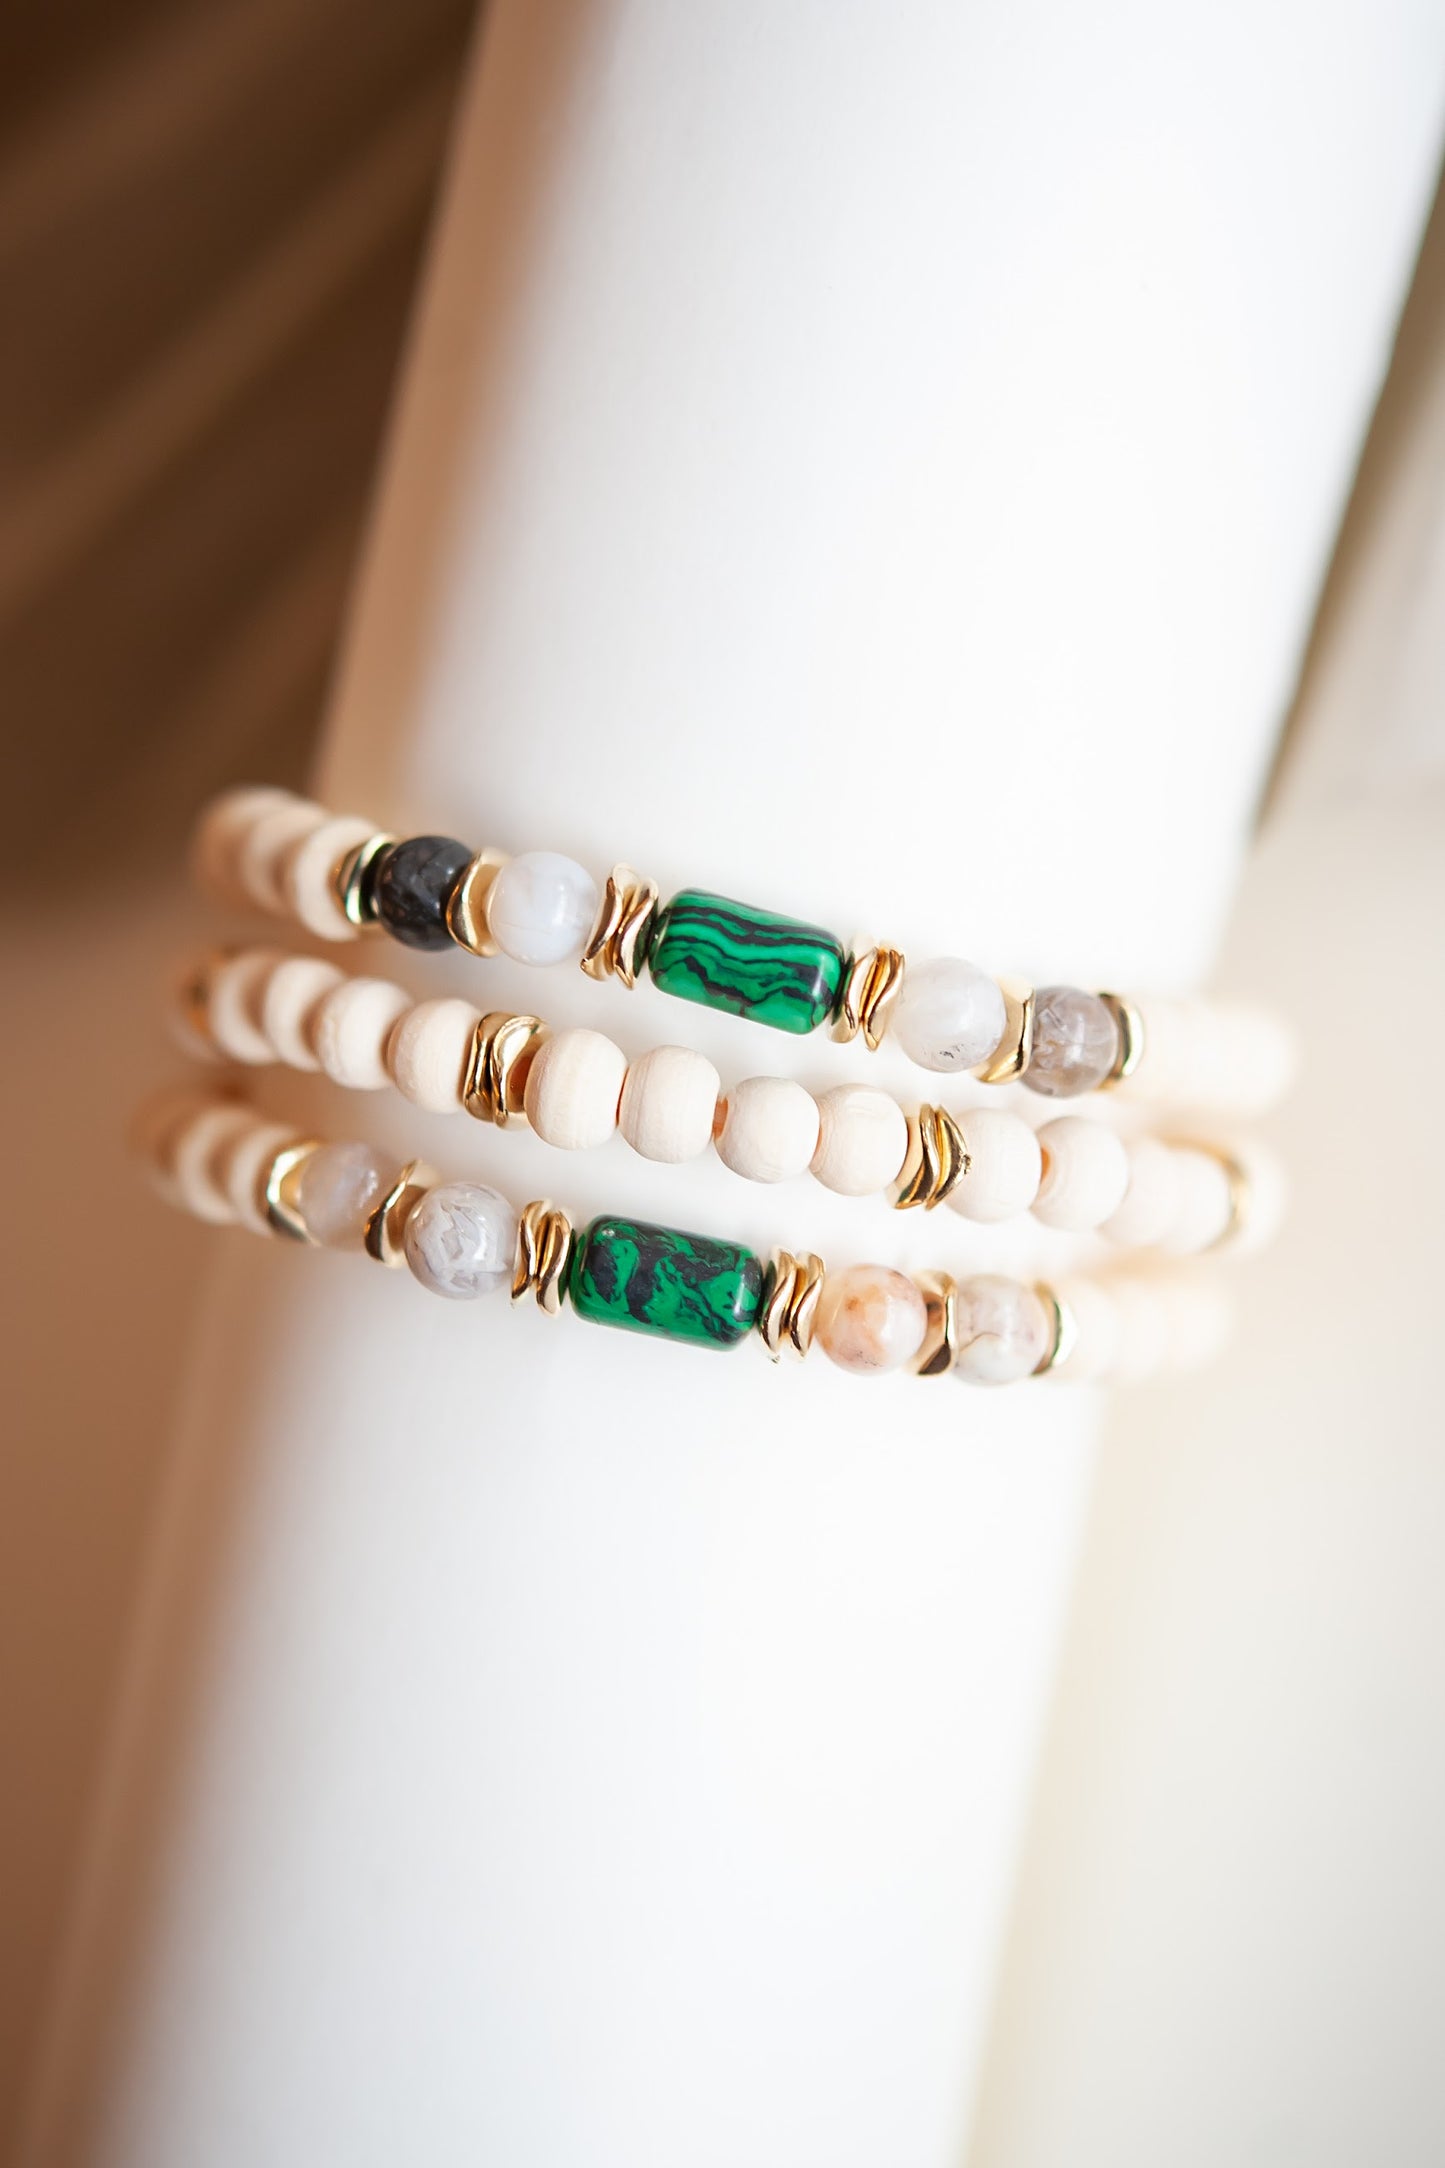 Load image into Gallery viewer, Bree Wood Beaded Bracelet Set | Natural Wood Layering Bracelets | Lucite Stone Bead Details
